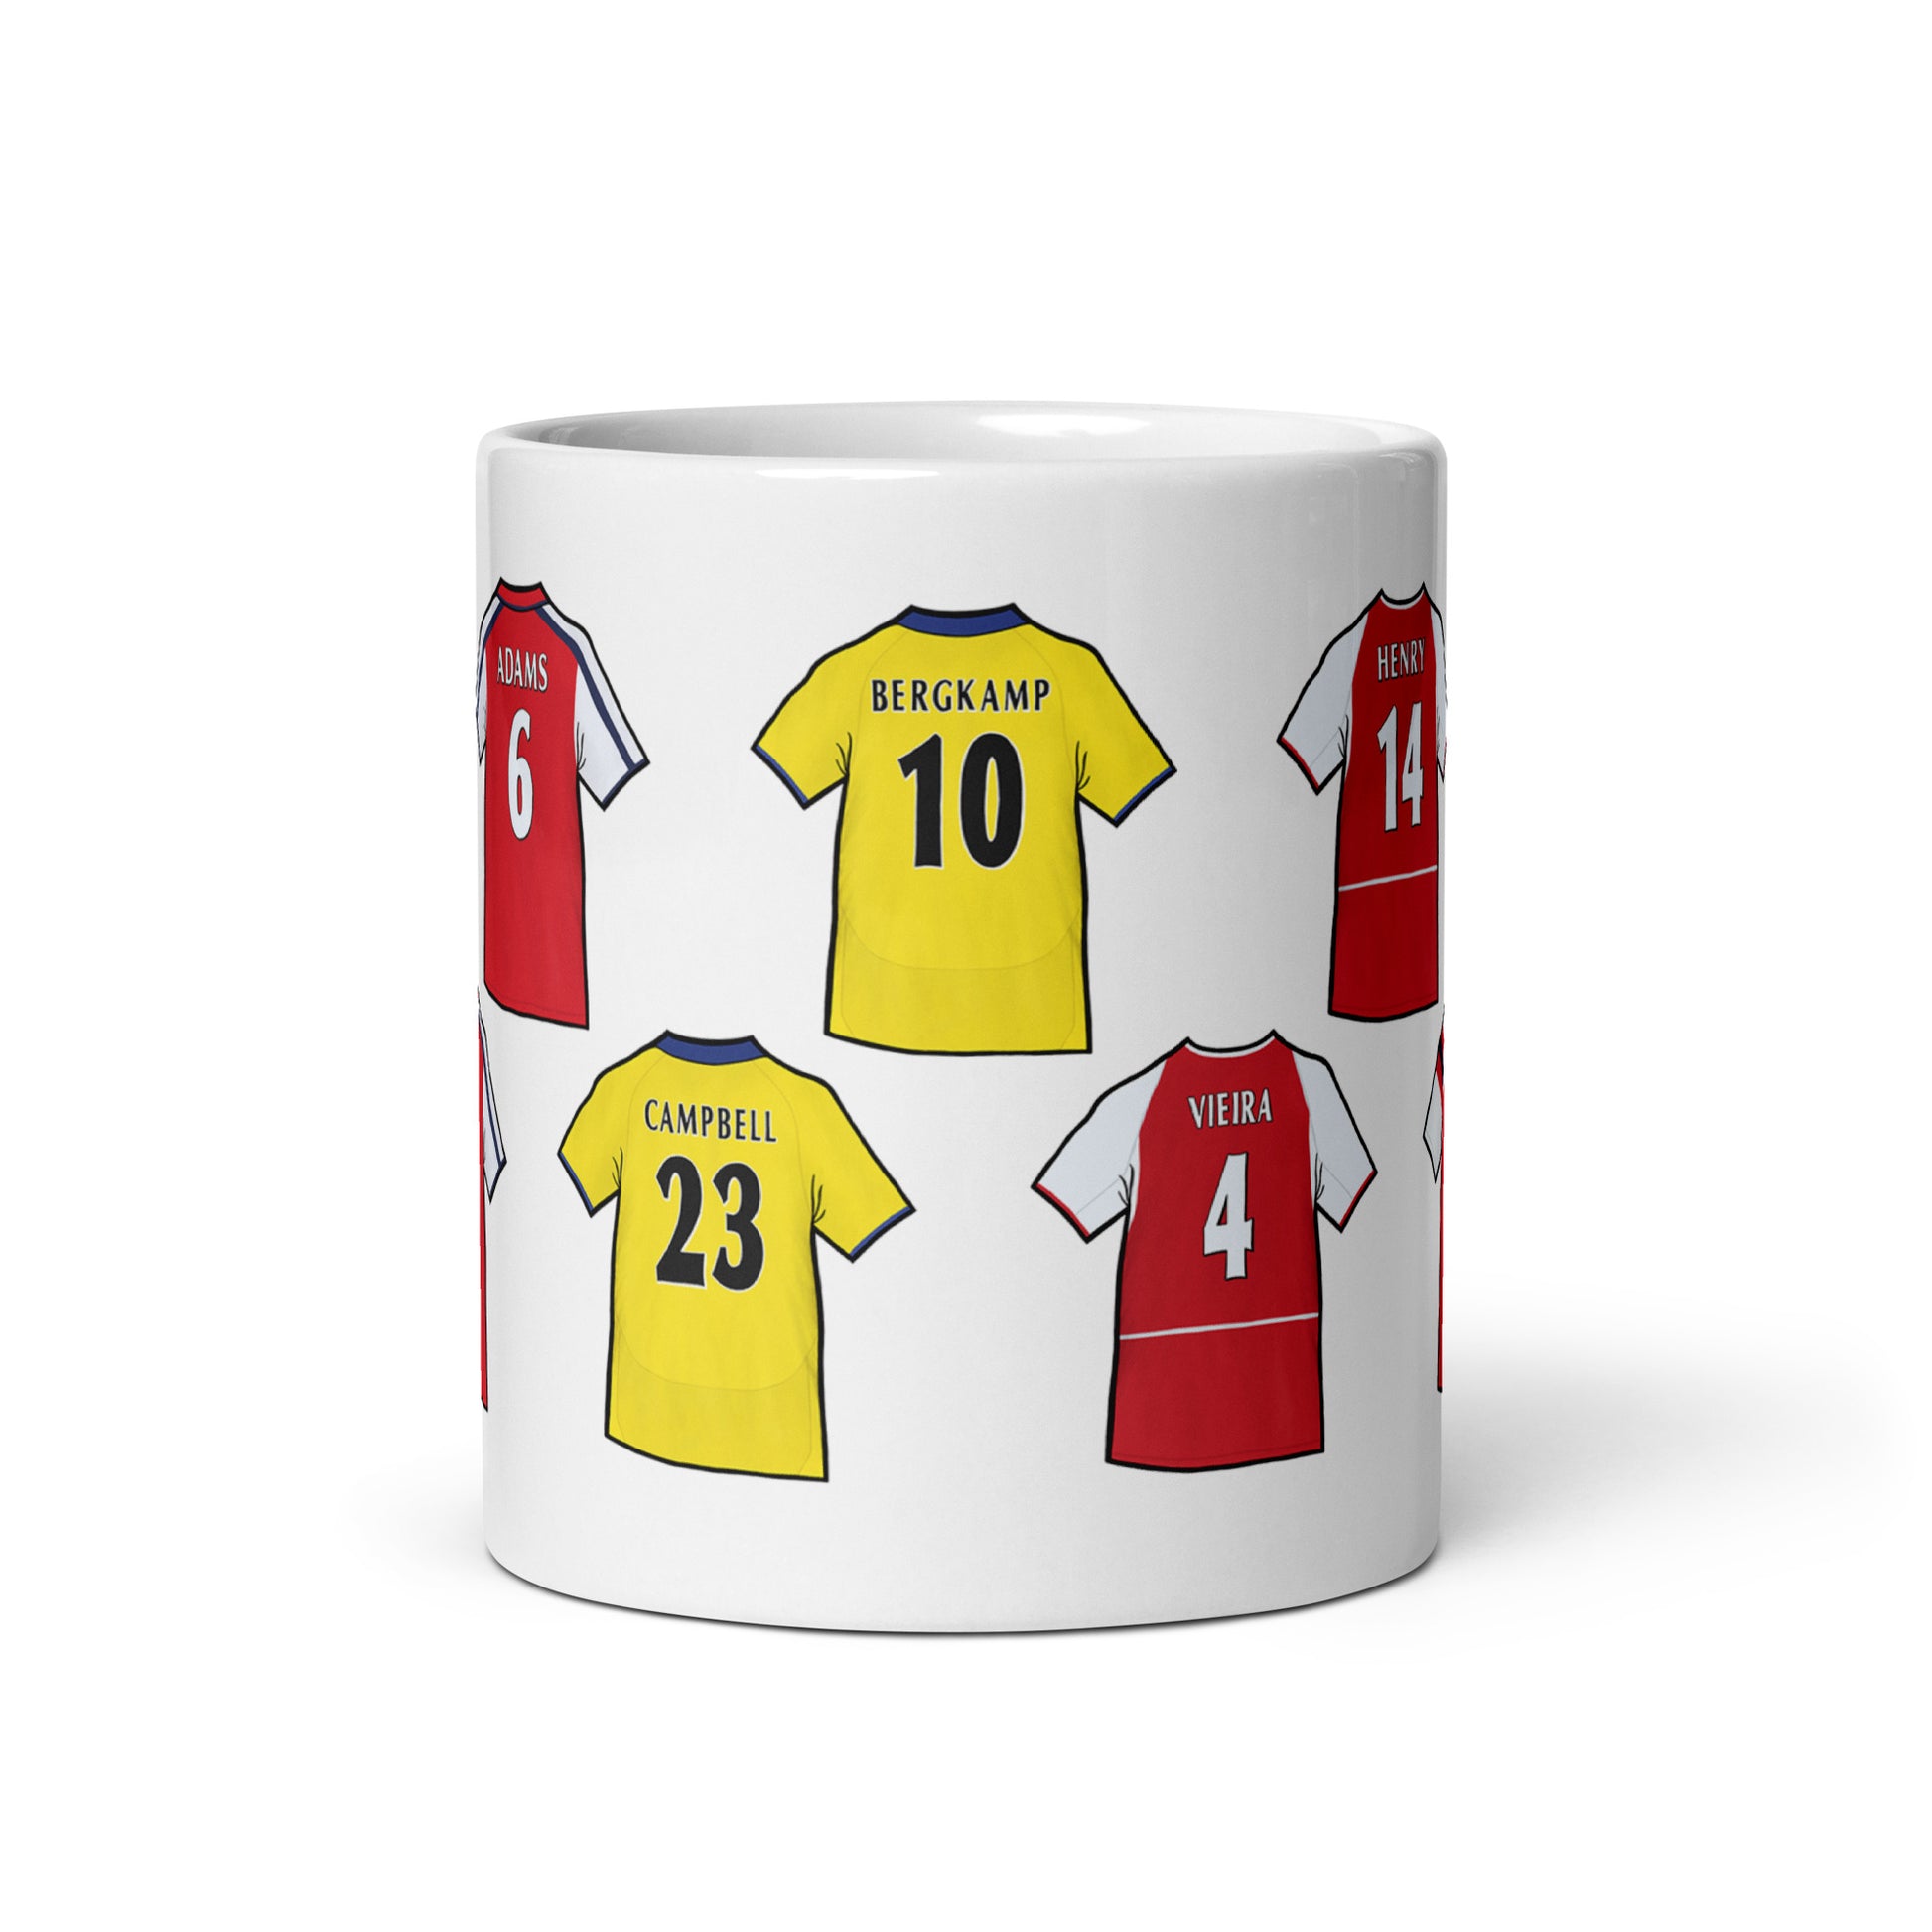 Mug featuring artwork of the shirts of legendary players to have played for Arsenal football club